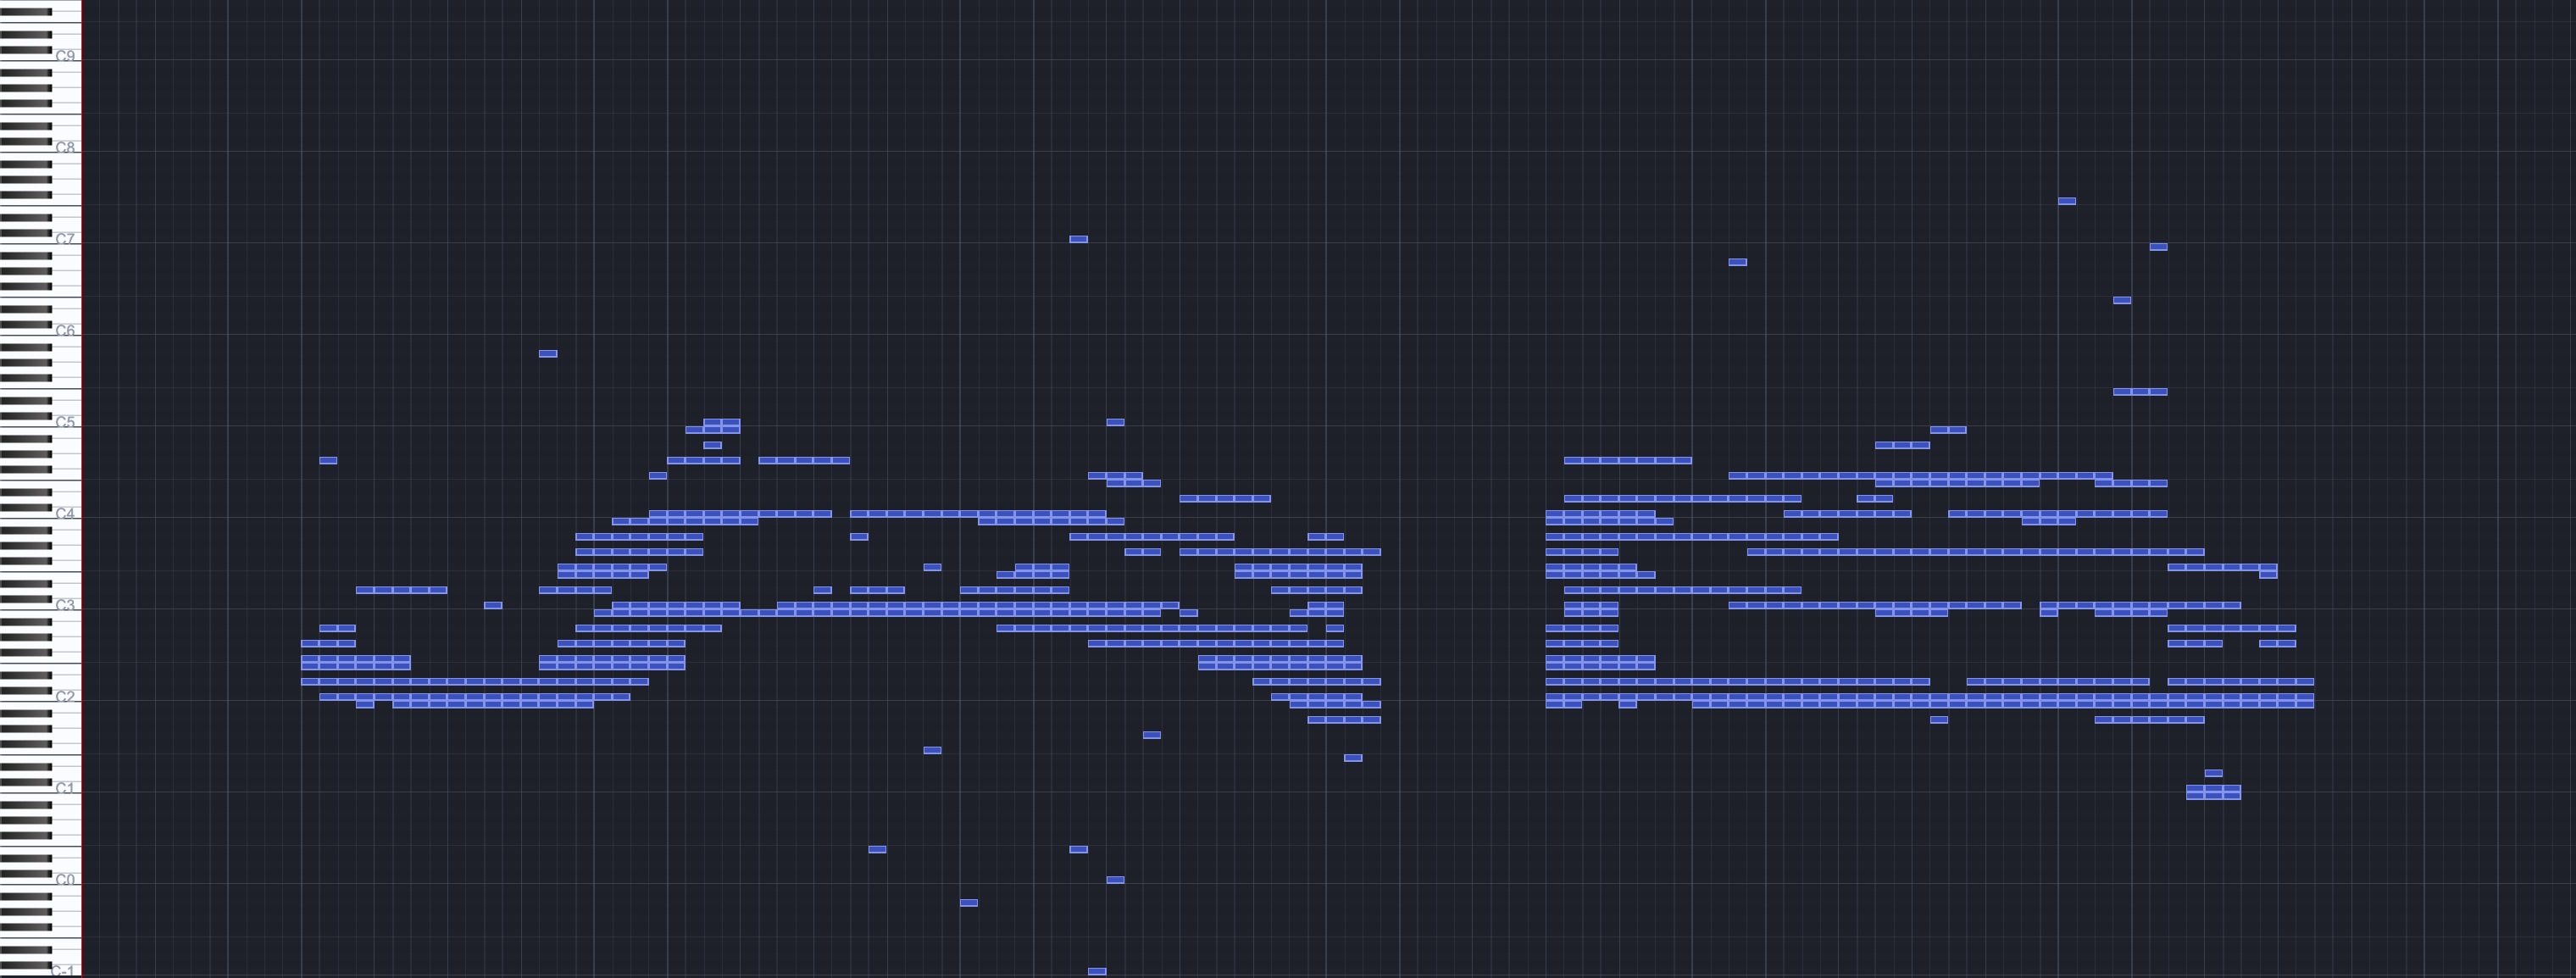 Piano roll view of the reconstructed MIDI